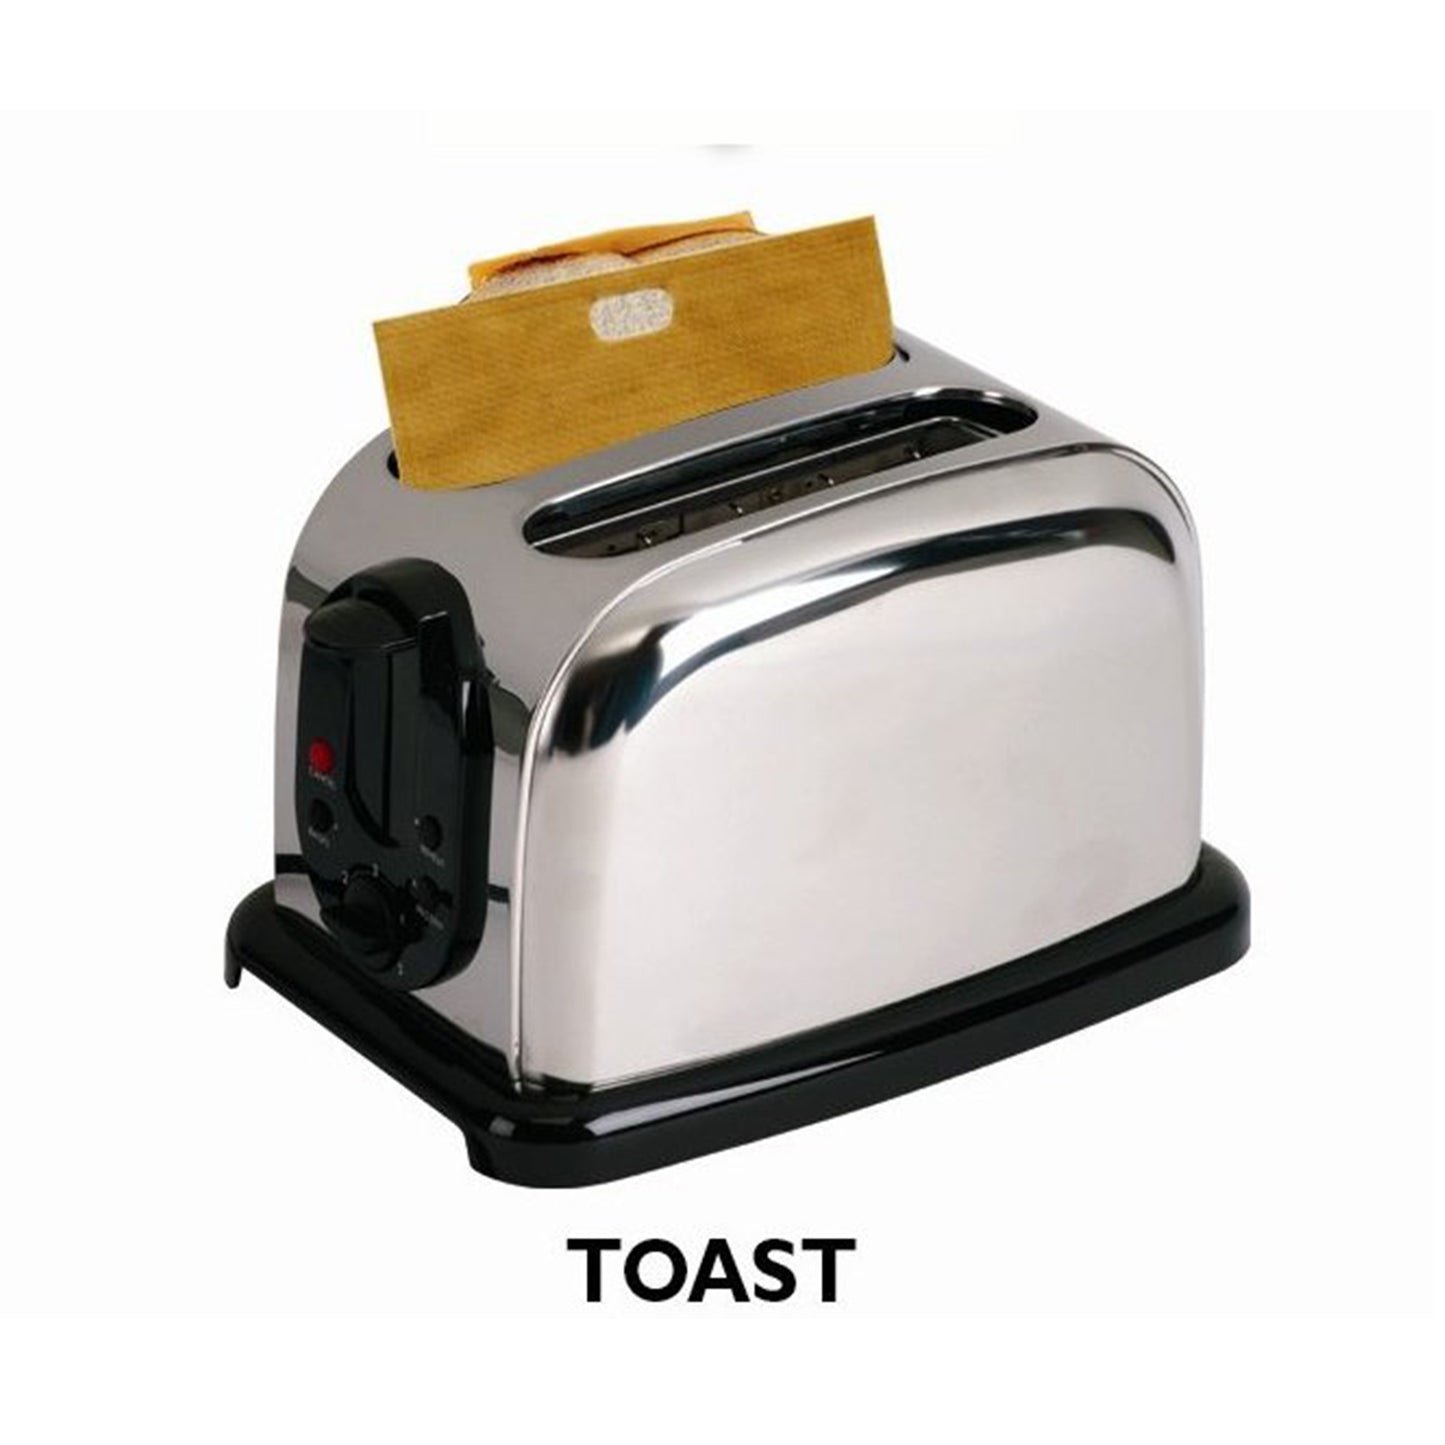 Toastabags XL - 2 Pack